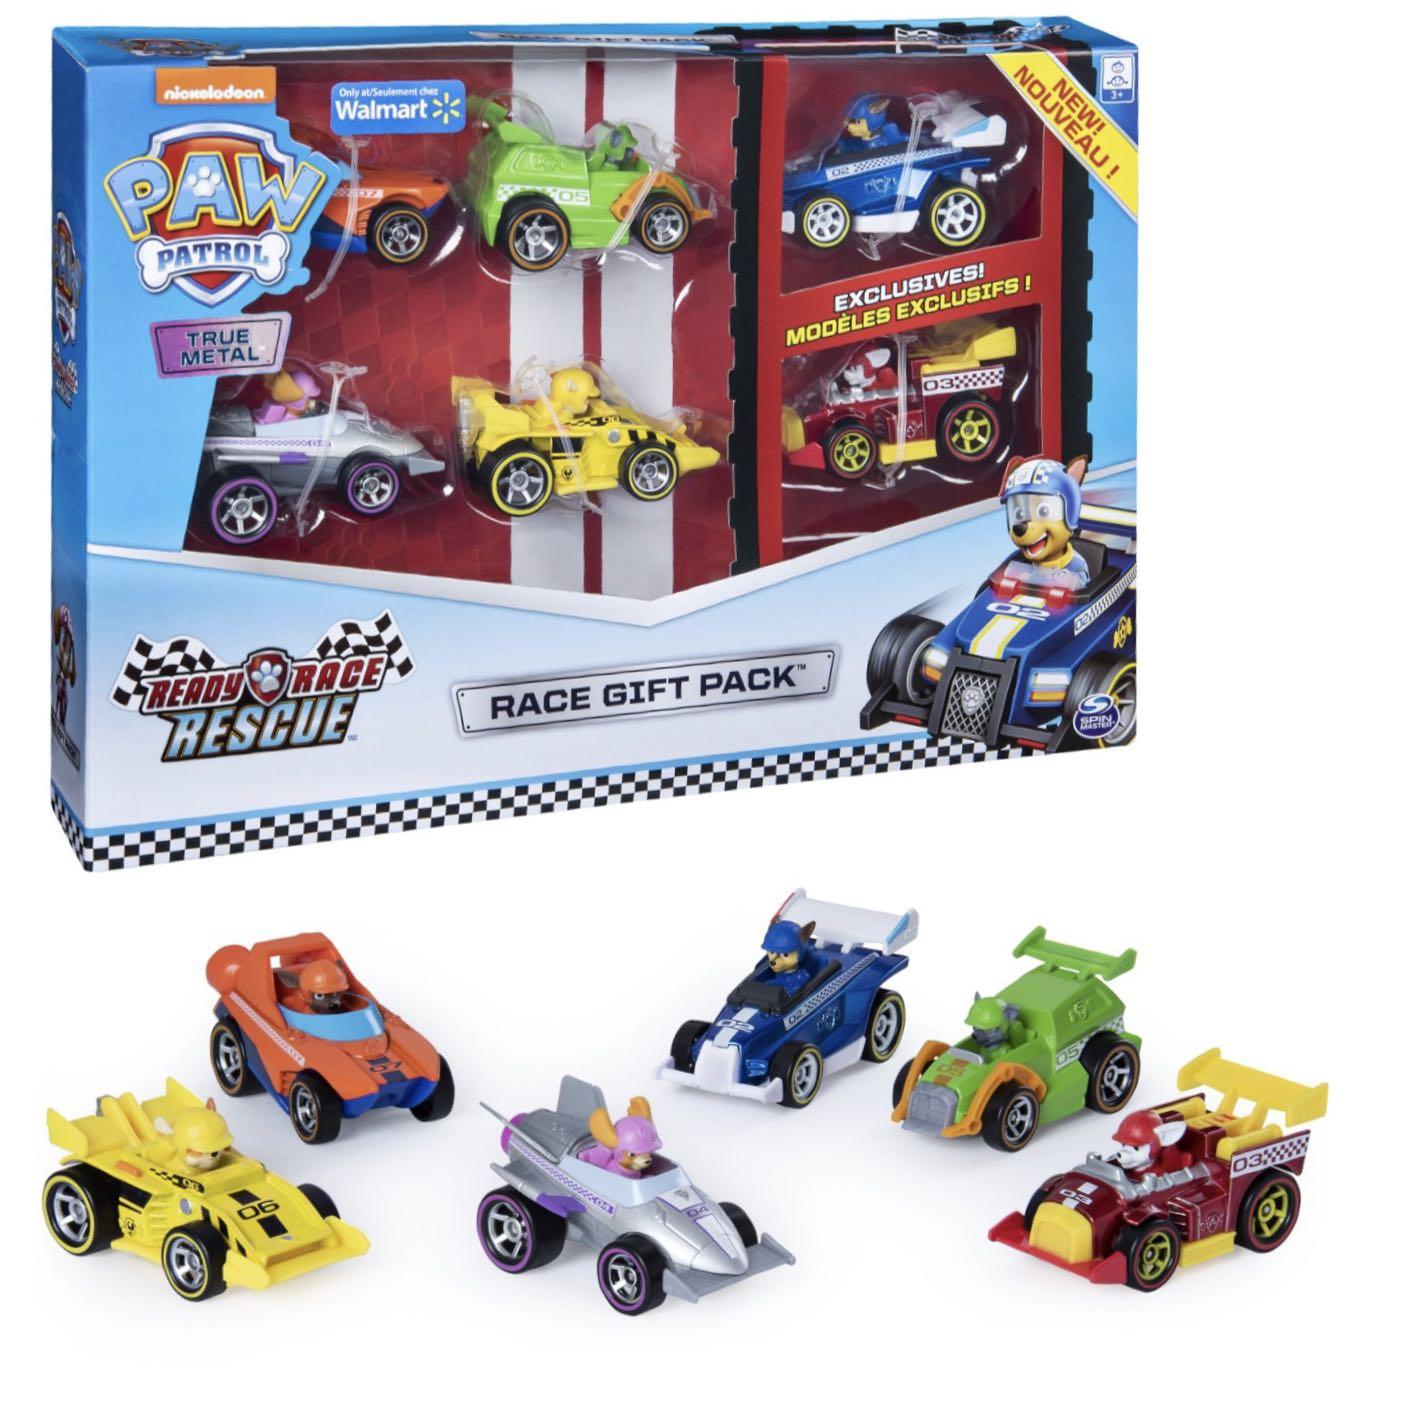 PAW Patrol, True Metal Classic Gift Pack of 6 Collectible Die-Cast  Vehicles, 1:55 Scale 